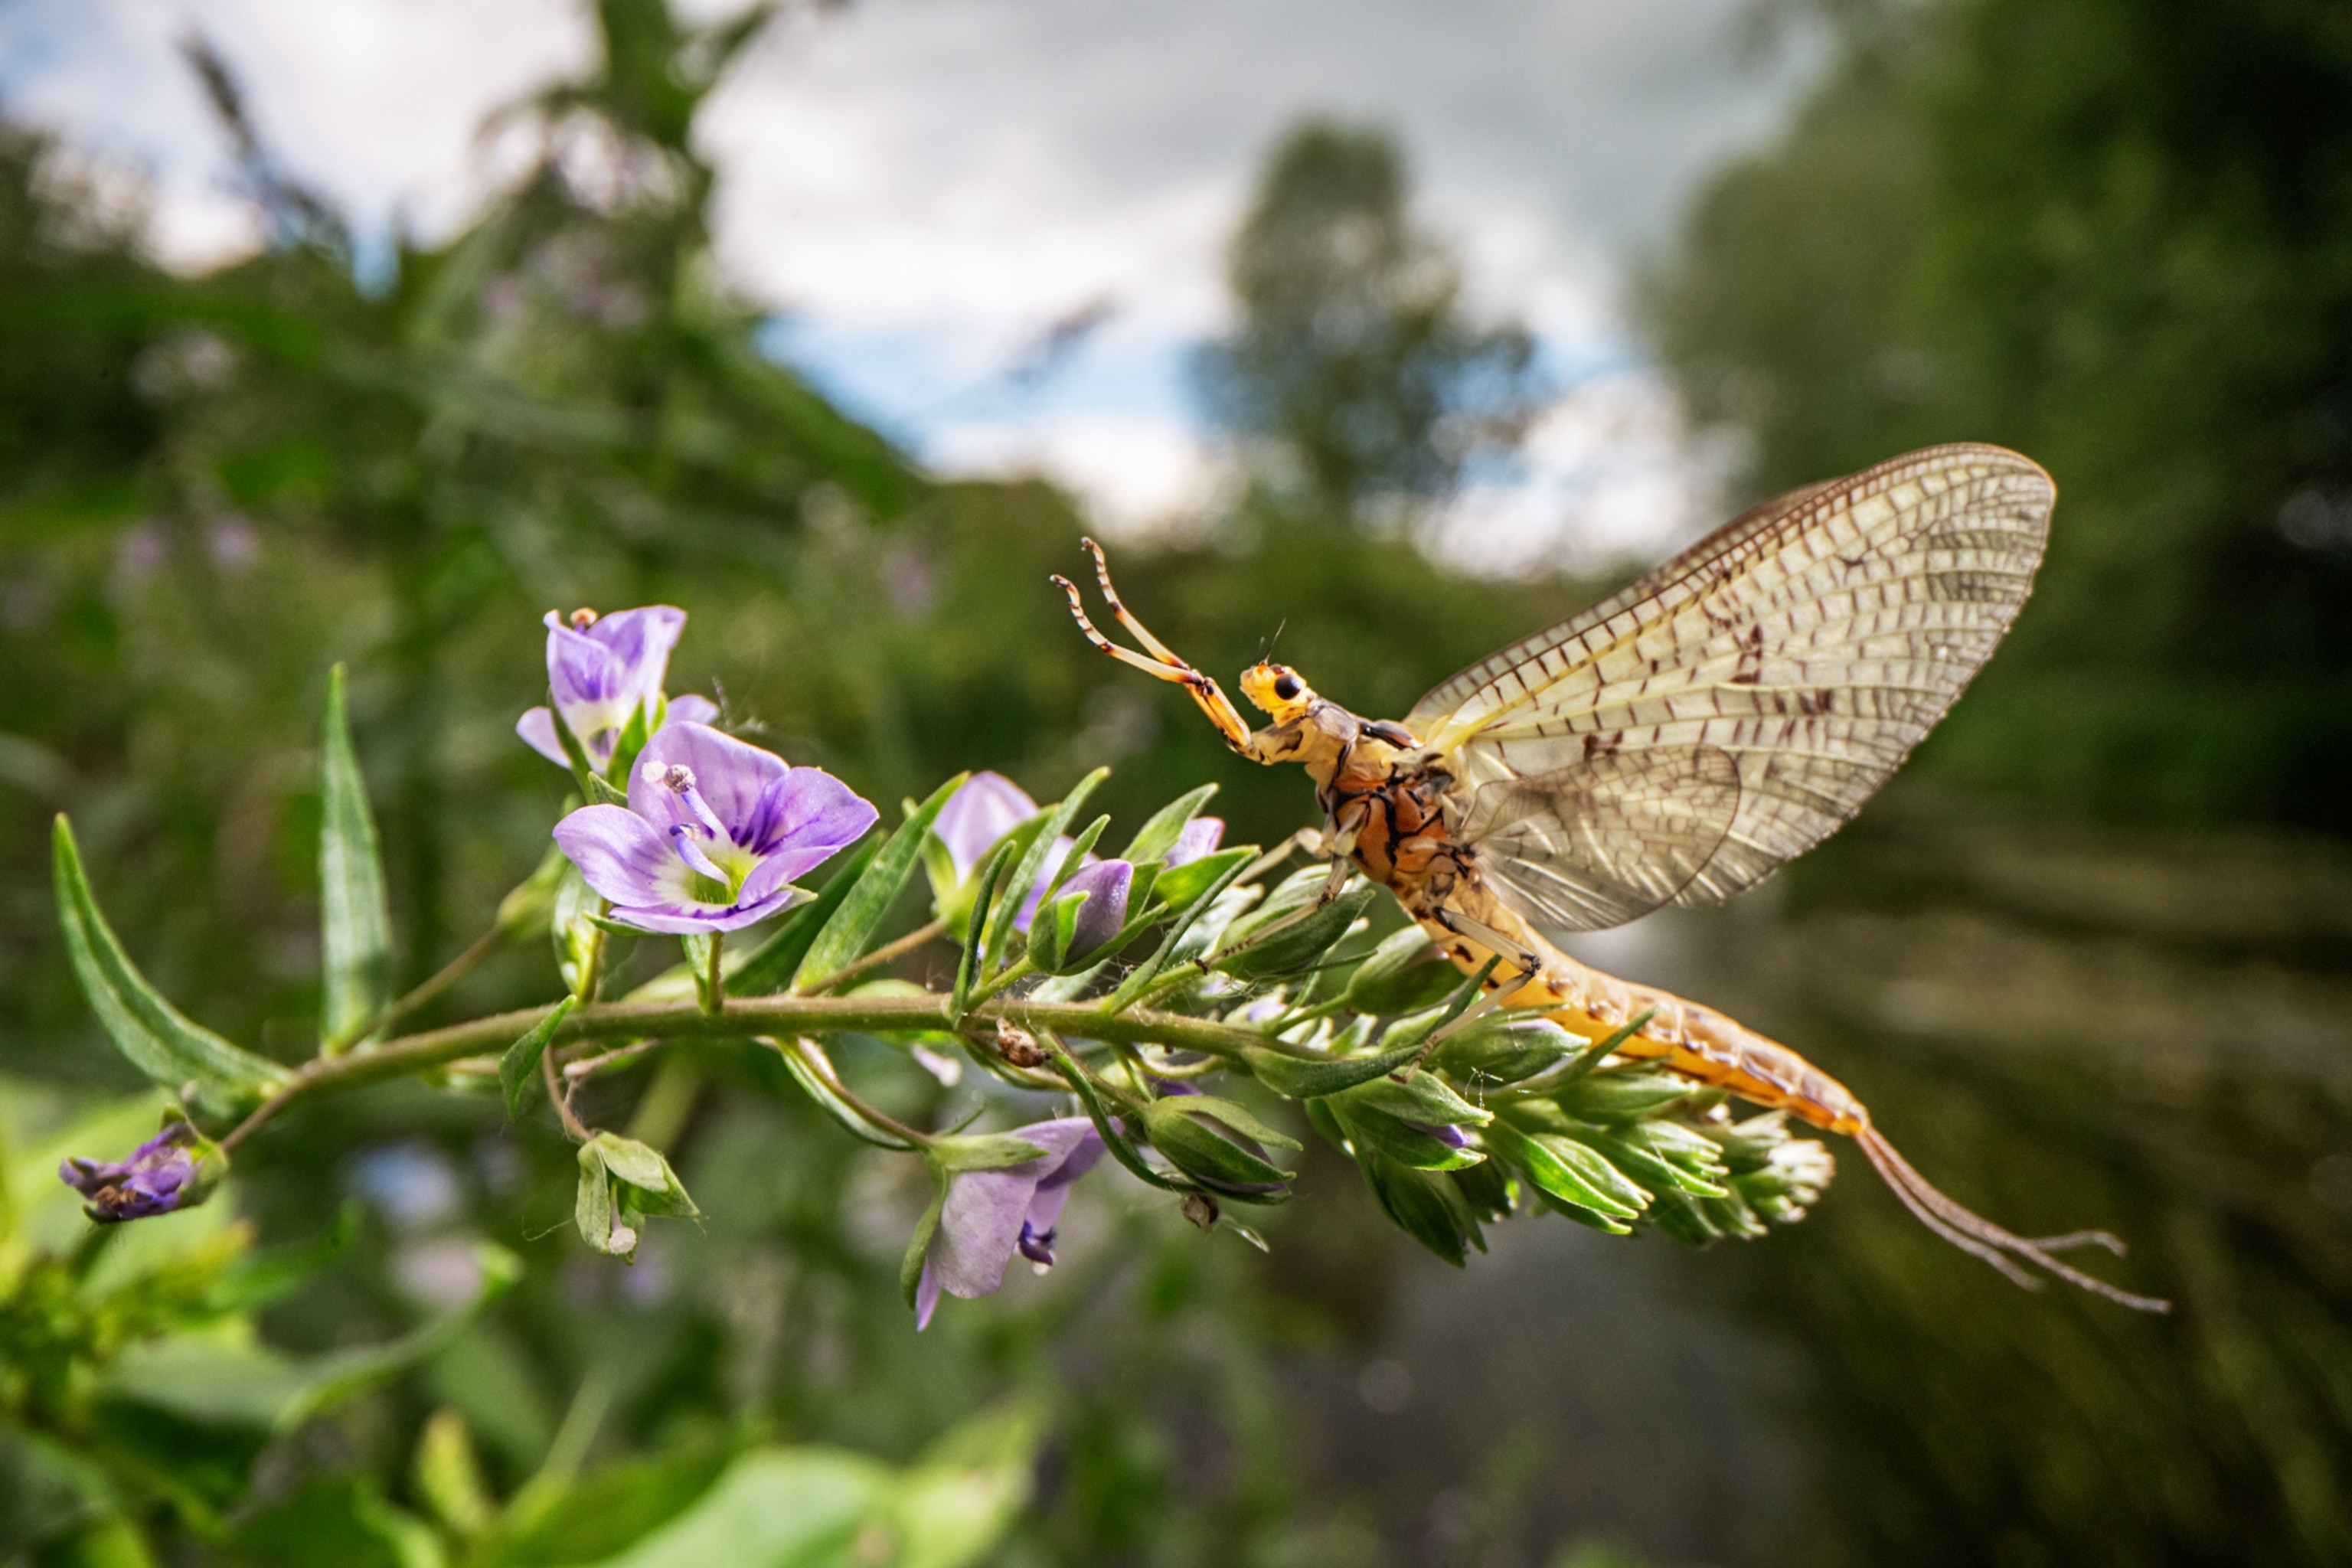 Mayfly resting on the tip of a stem with purple flowers. It's front legs are spread out and "scissored" apart